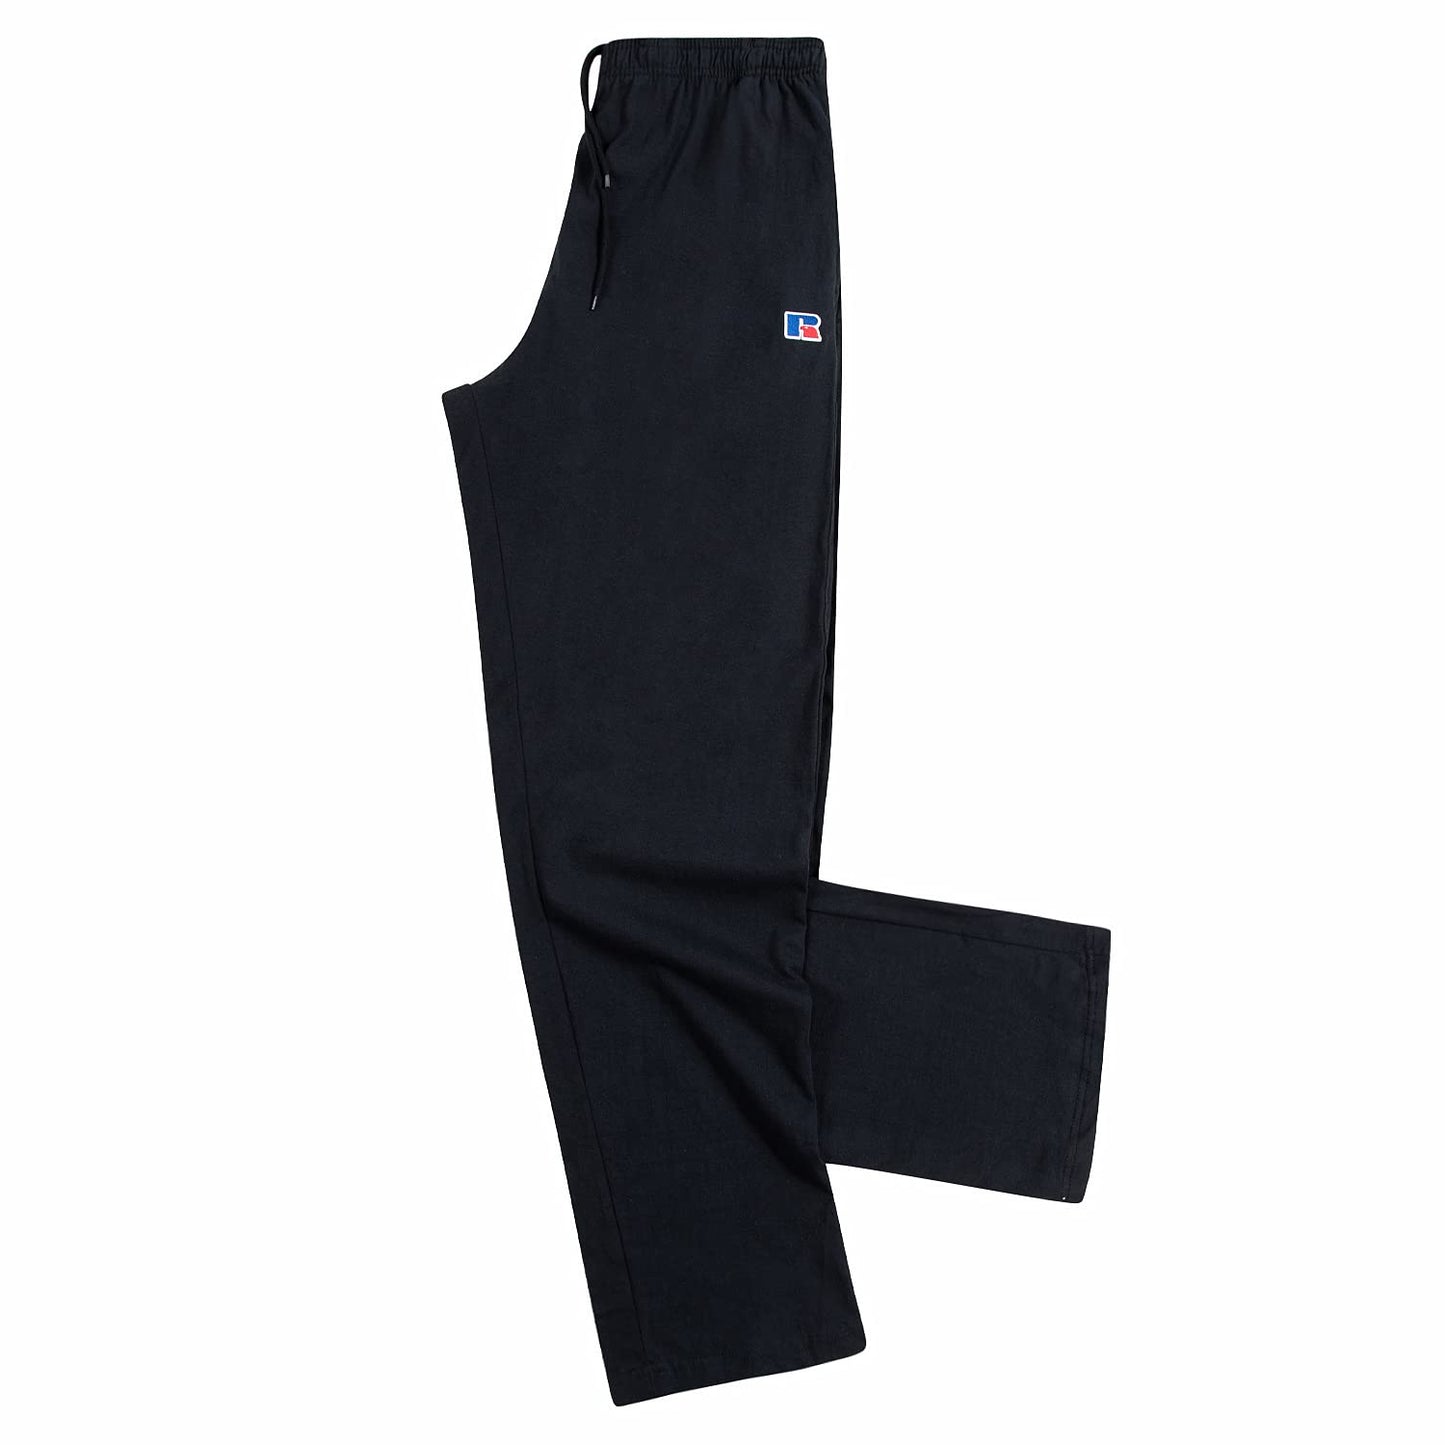 Men's Russell Athletic Pants − Shop now up to −33%